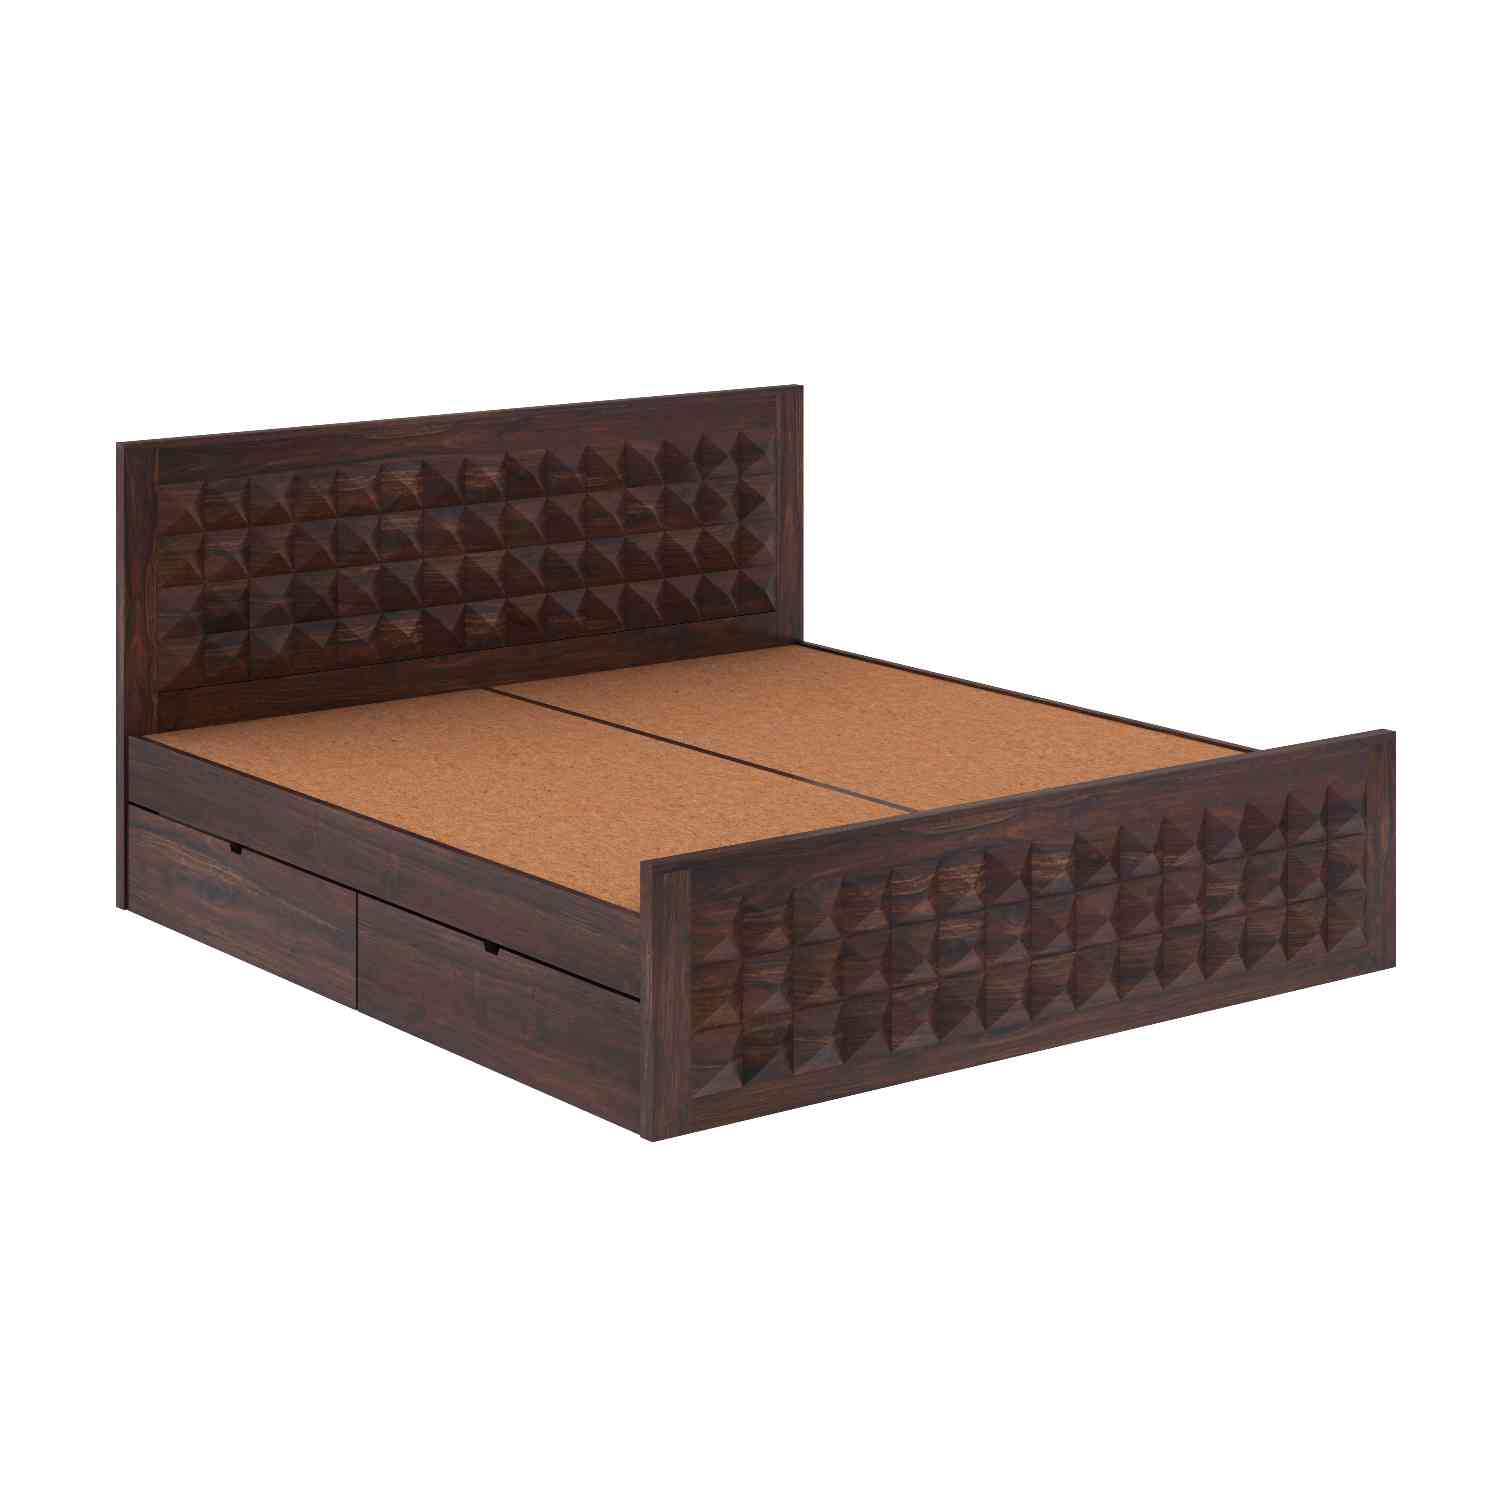 Sofia Solid Sheesham Wood Bed With Four Drawers (King Size, Walnut Finish)